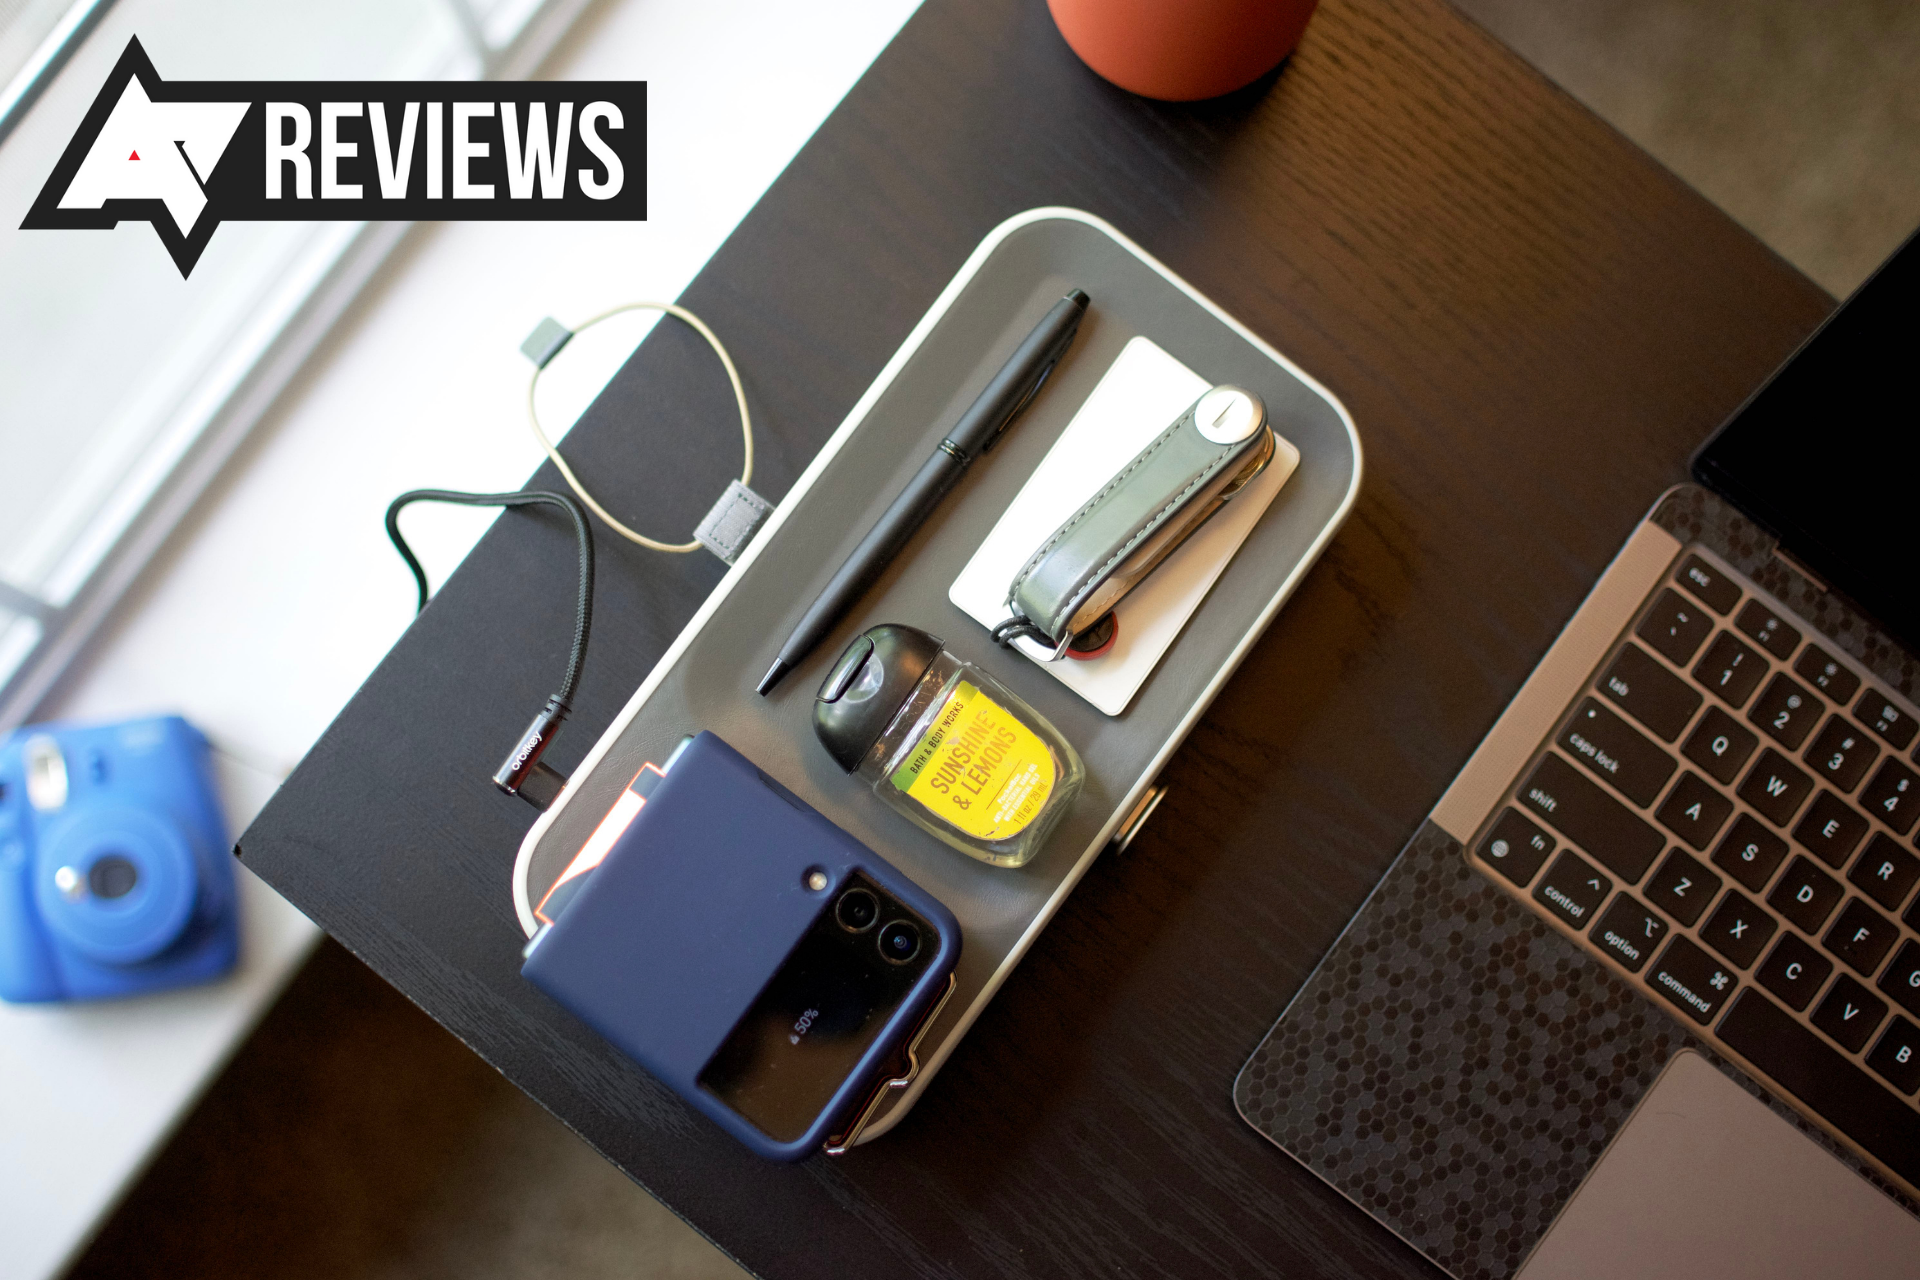 Review: The Orbitkey Nest is a pricey premium portable power provider